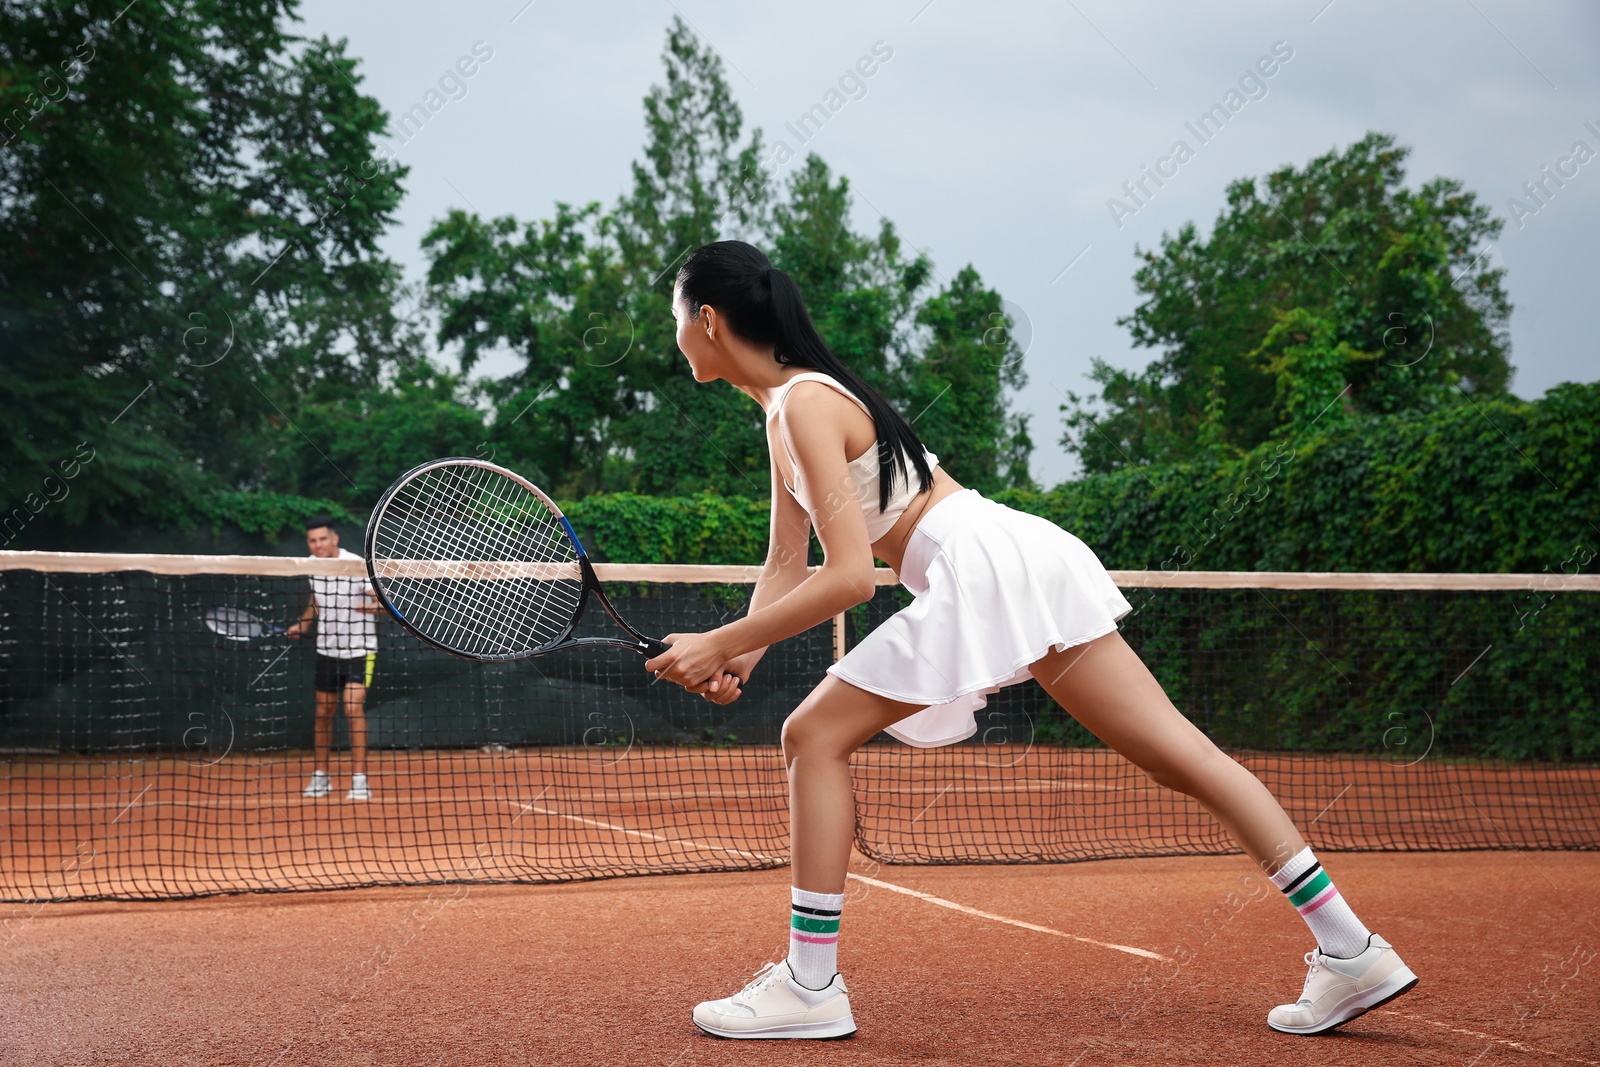 Photo of Man and woman playing tennis on court